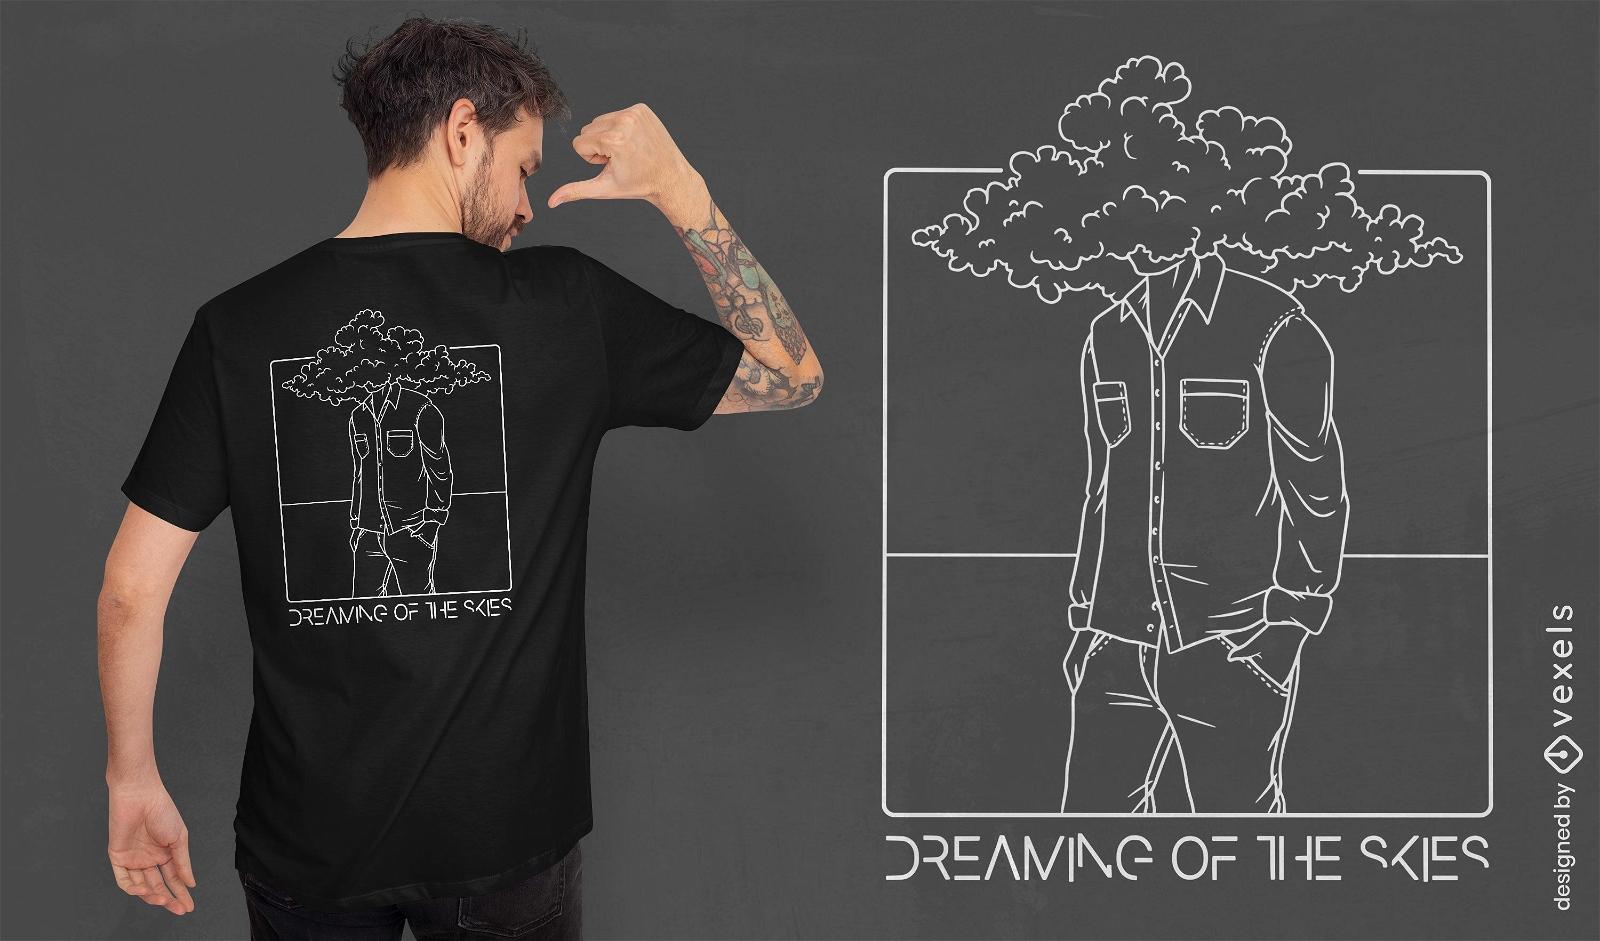 Man with head in the clouds t-shirt design